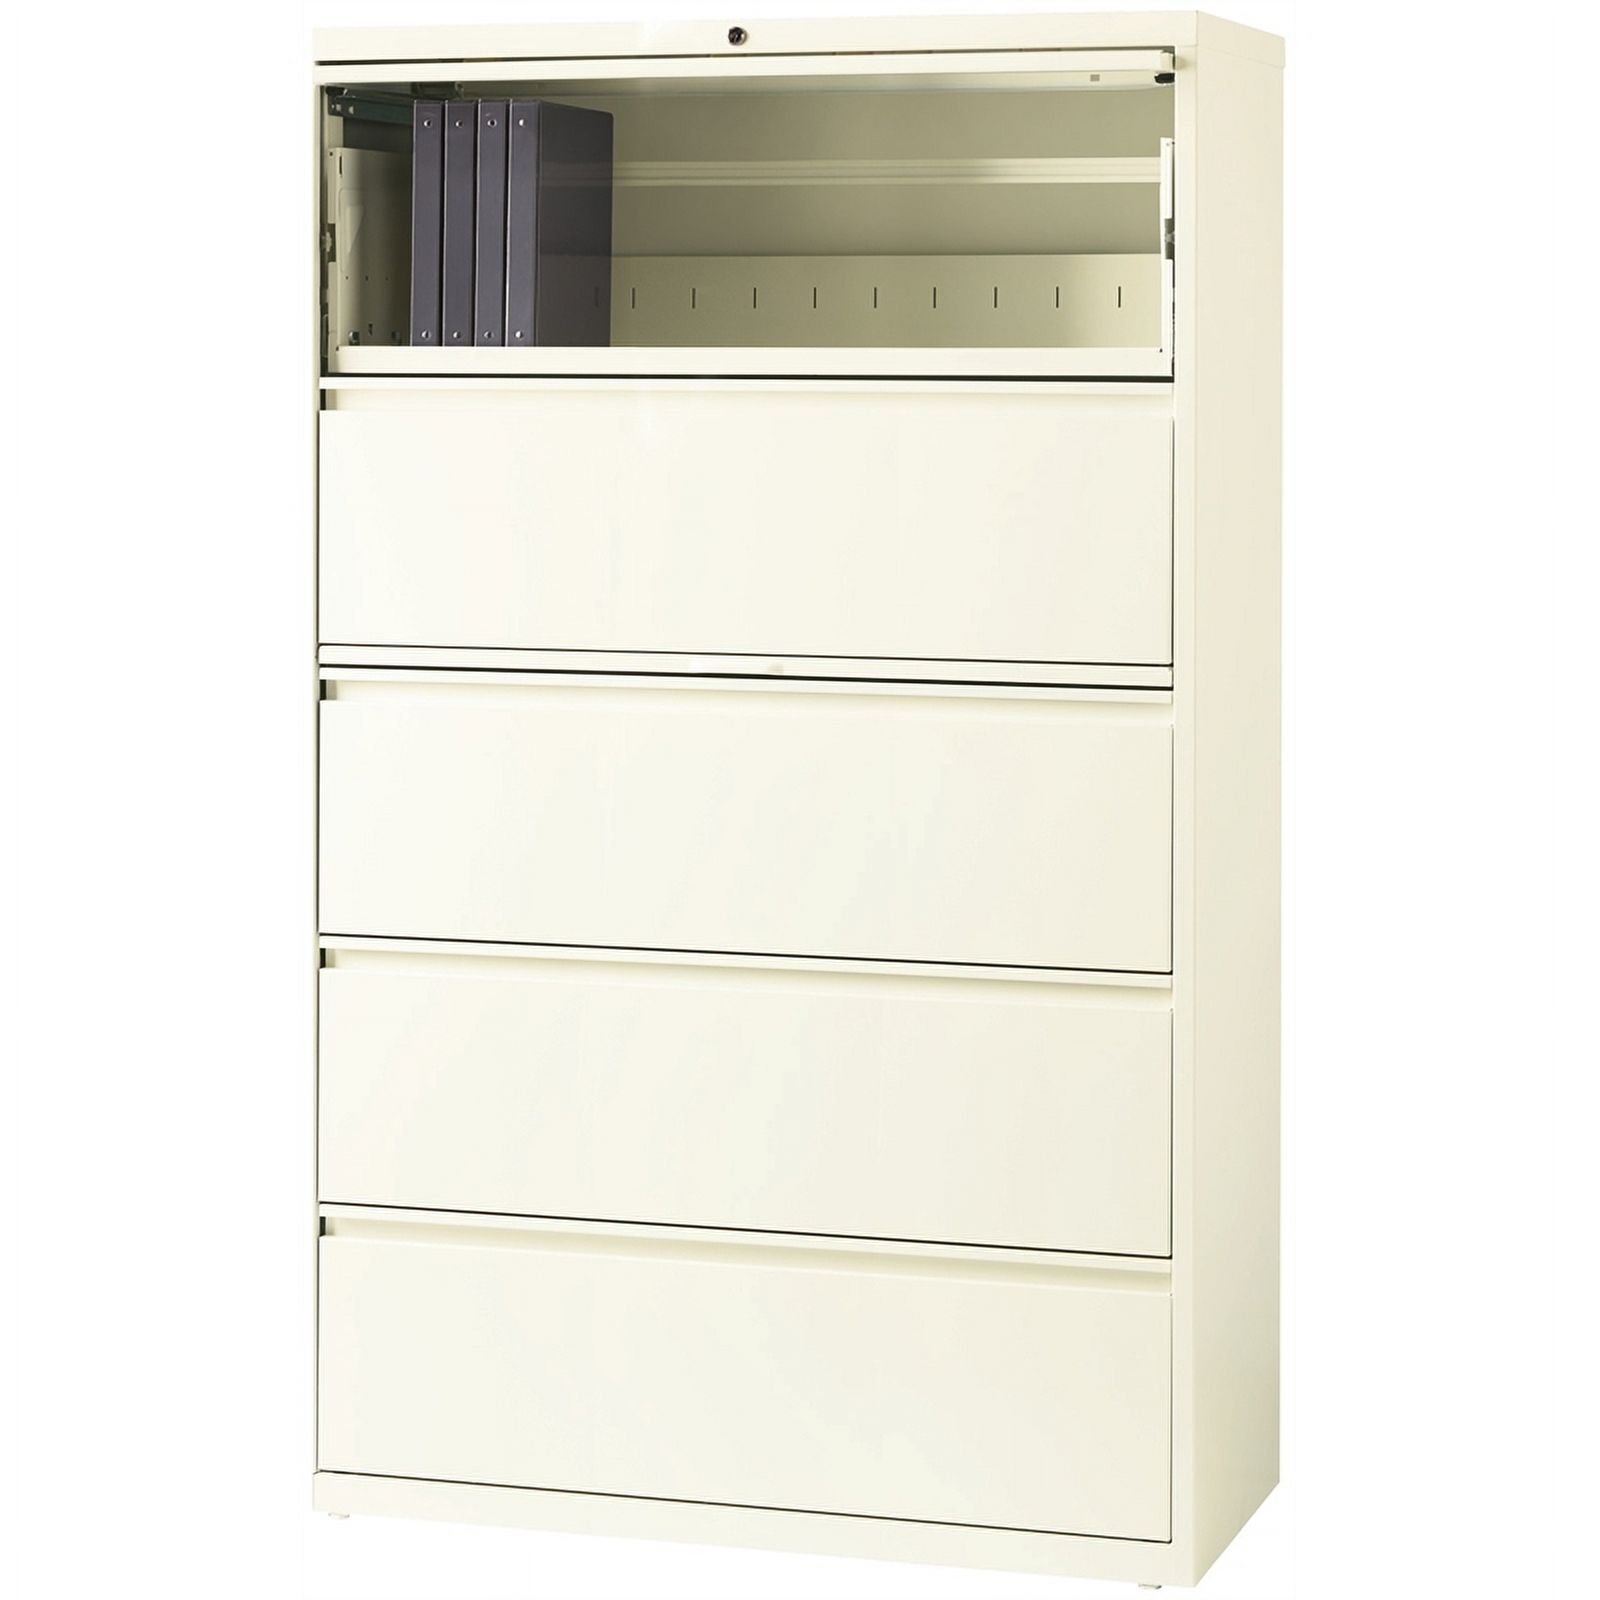 Scranton & Co 42" 5-Drawer Contemporary Metal Lateral File Cabinet in Off White - image 3 of 5